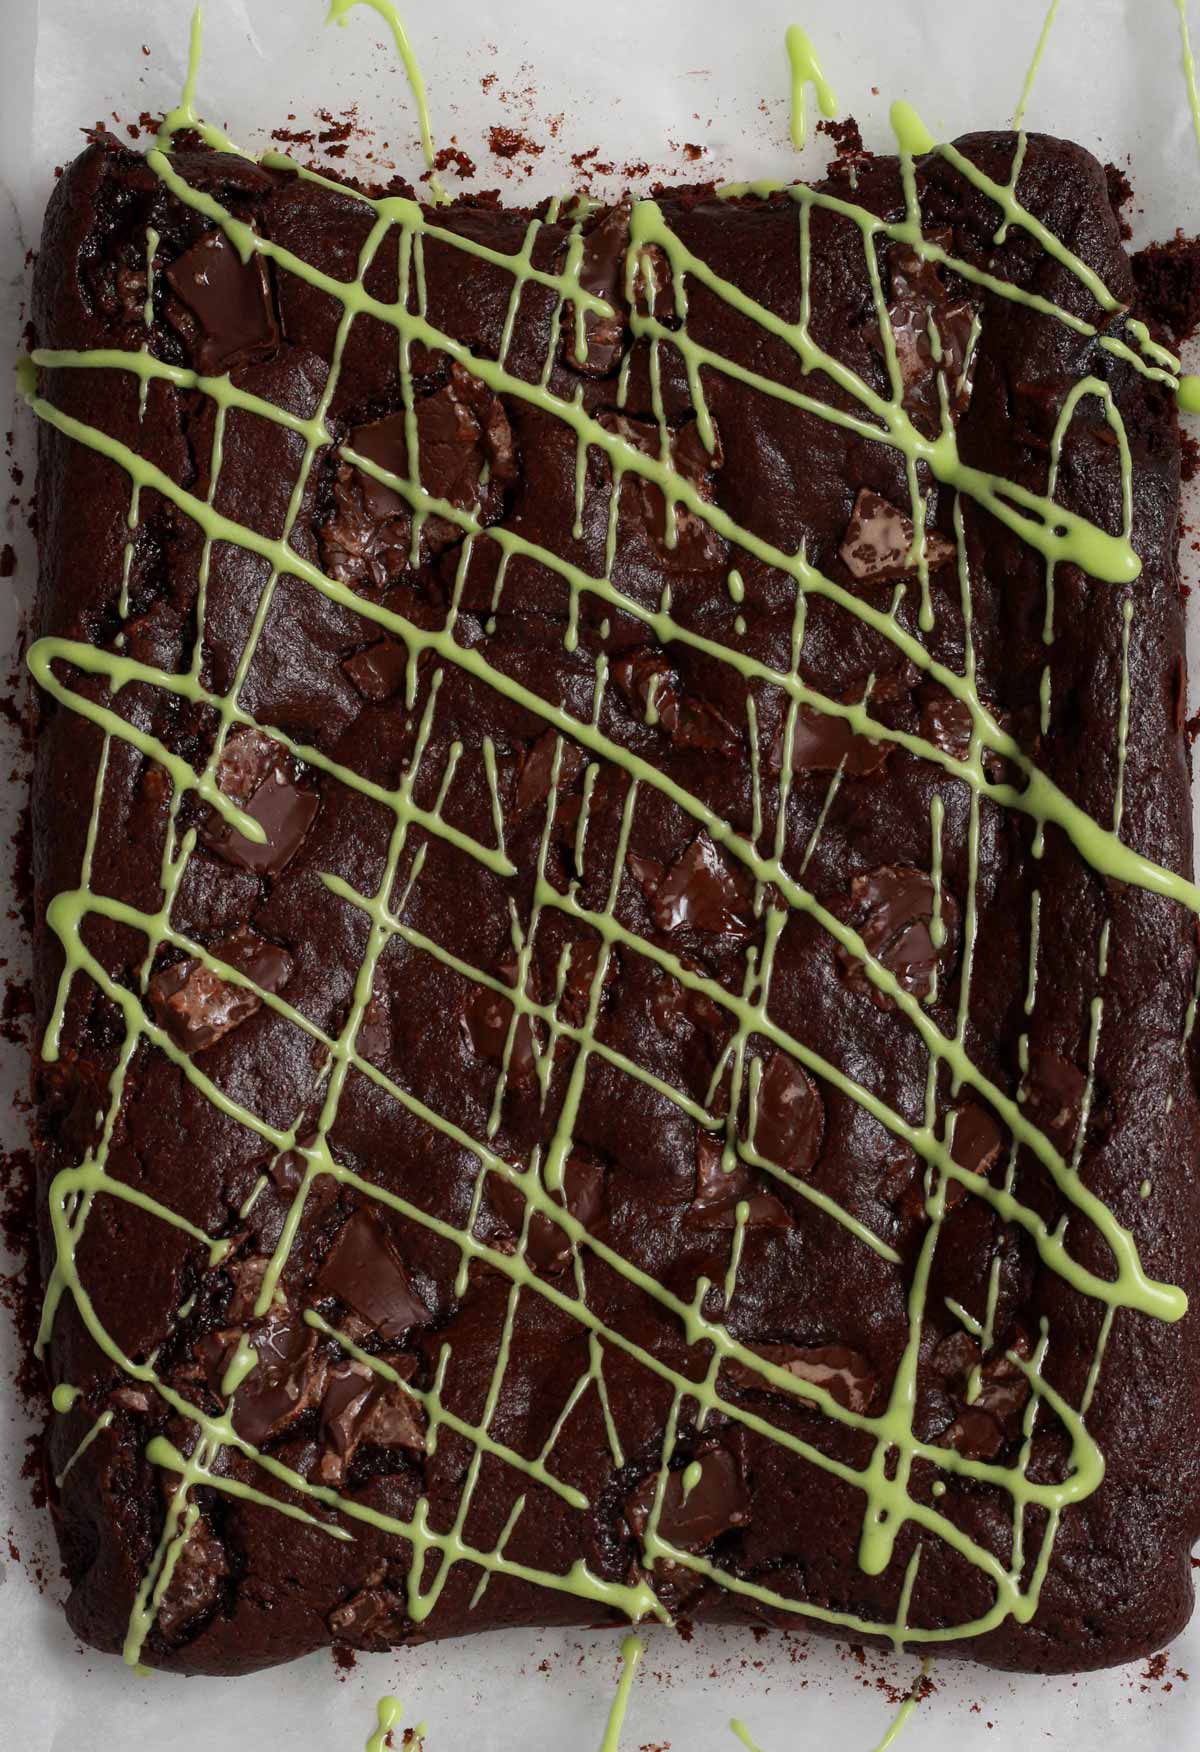 Green Icing Drizzled All Over The Chilled Brownies